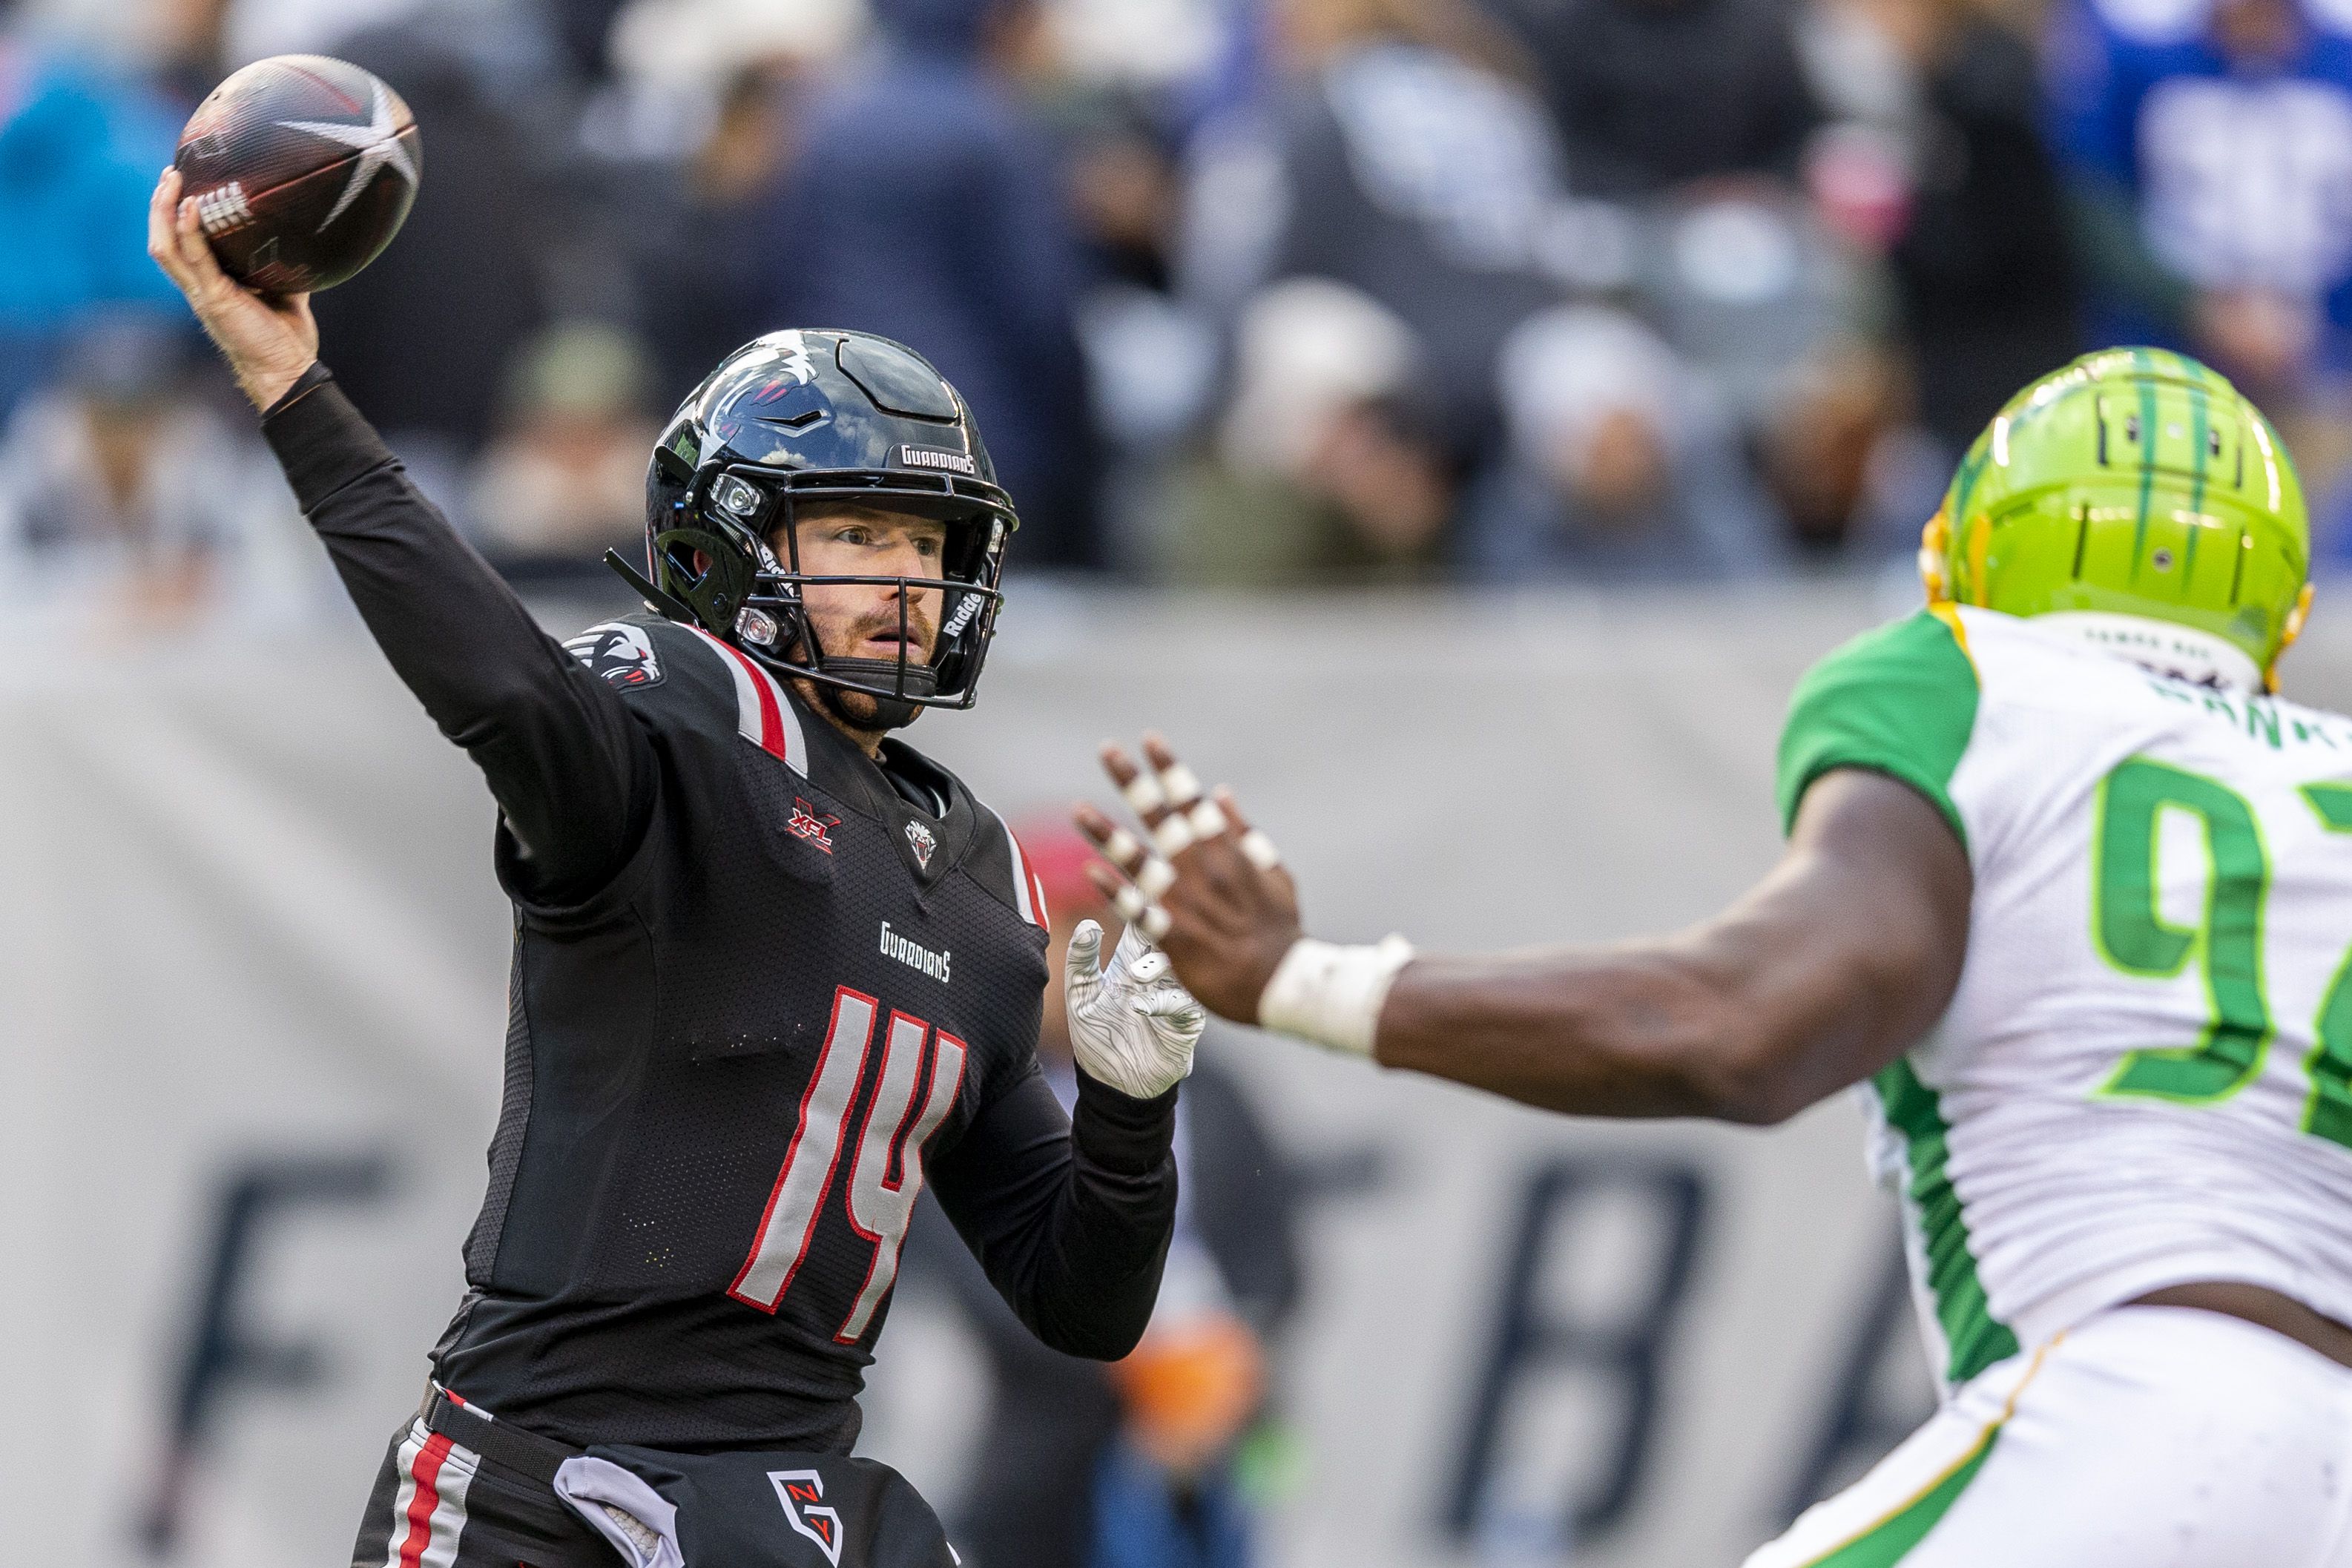 XFL 2020: A lot to like in NY Guardians' debut win at MetLife Stadium